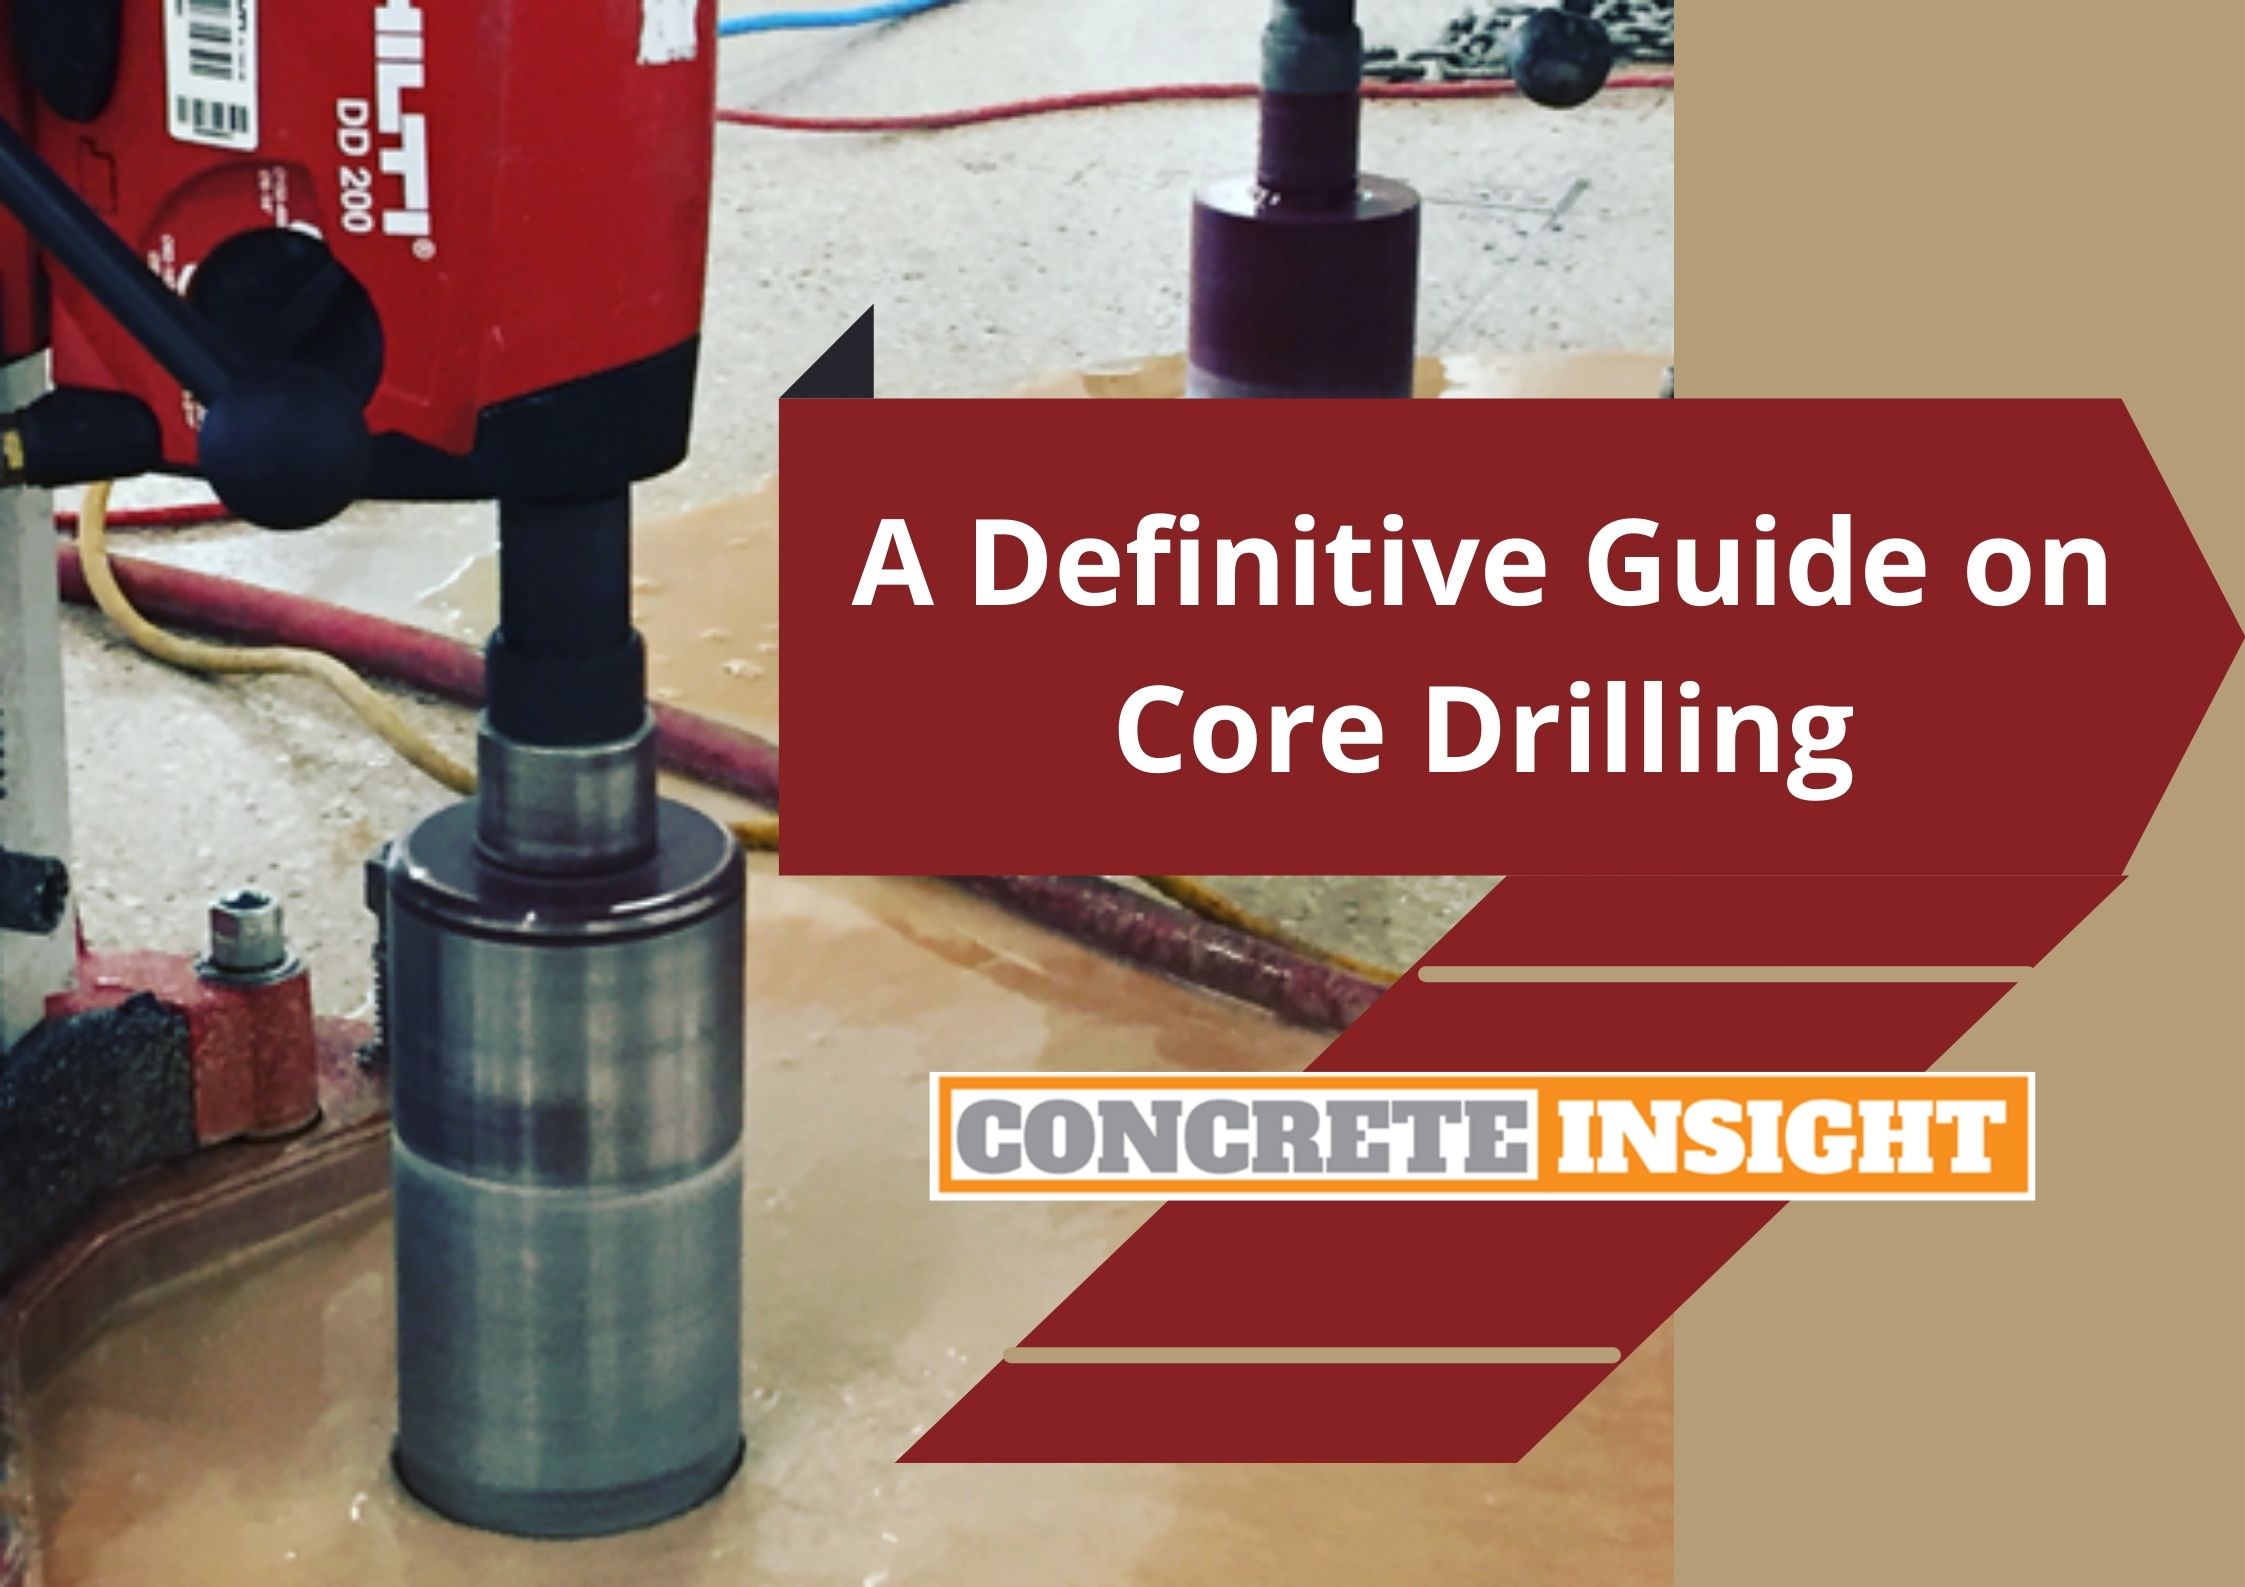 A Definitive Guide on Core Drilling